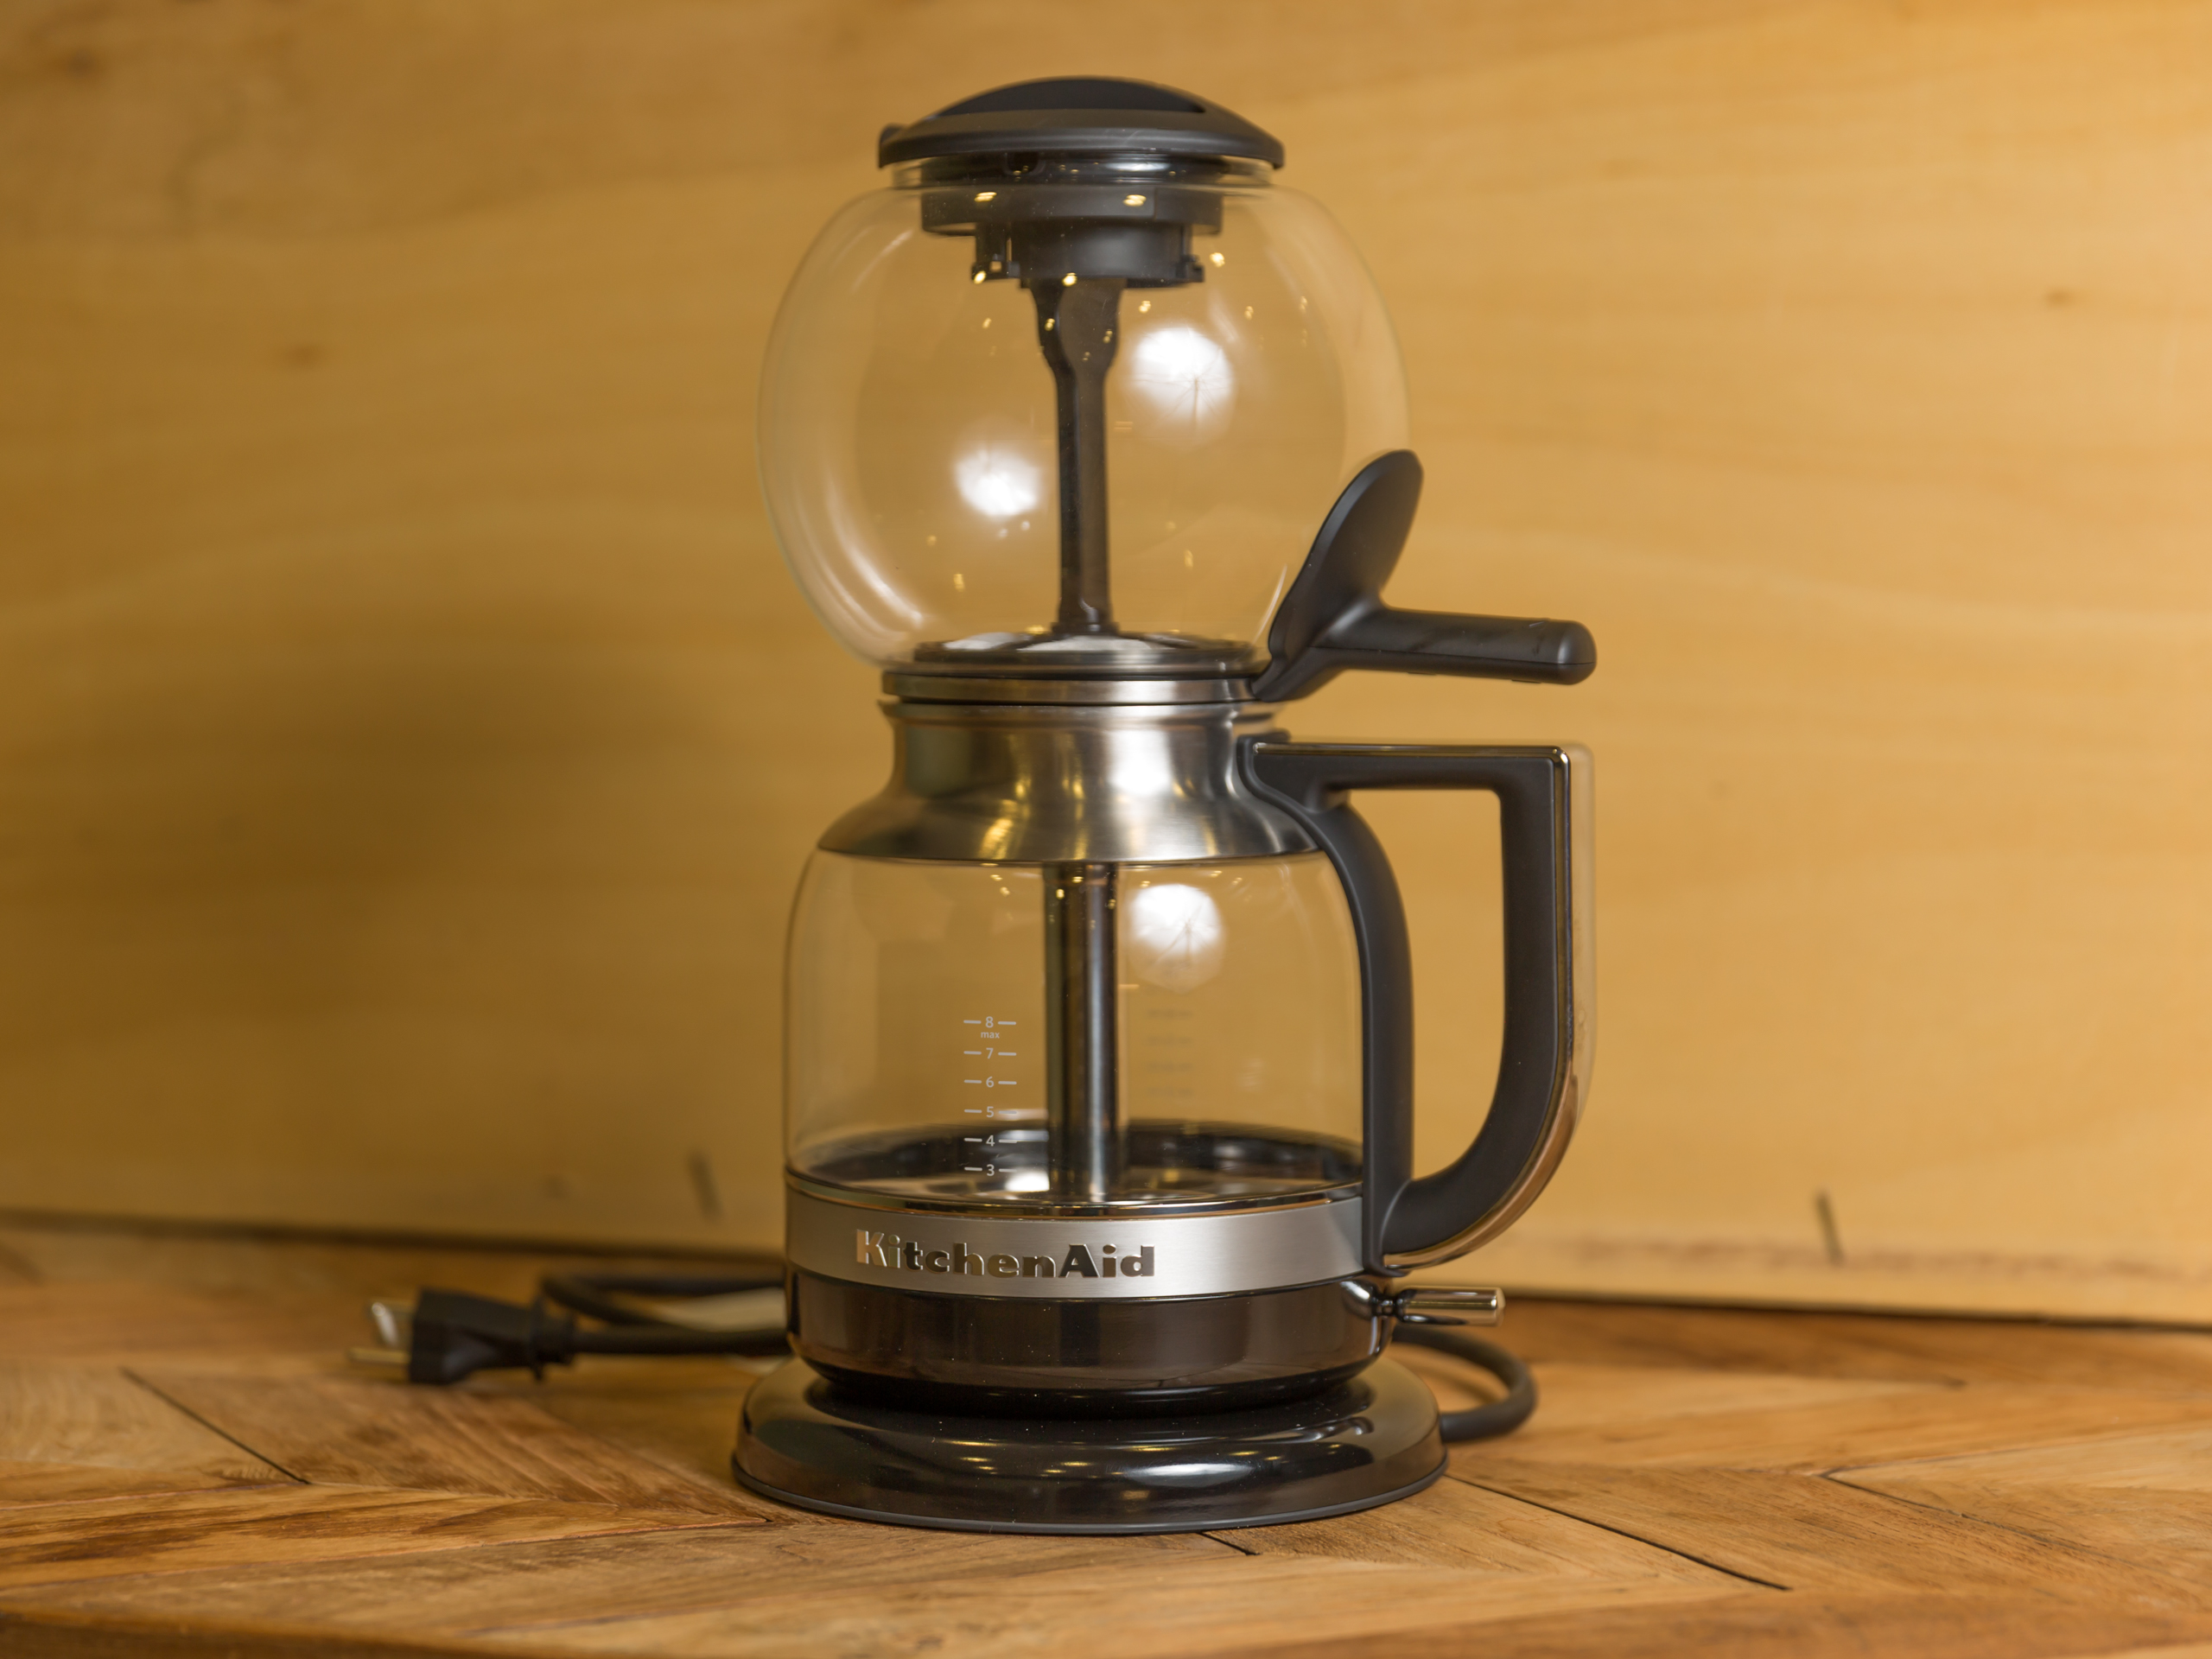 How To Clean Kitchenaid Coffee Maker 